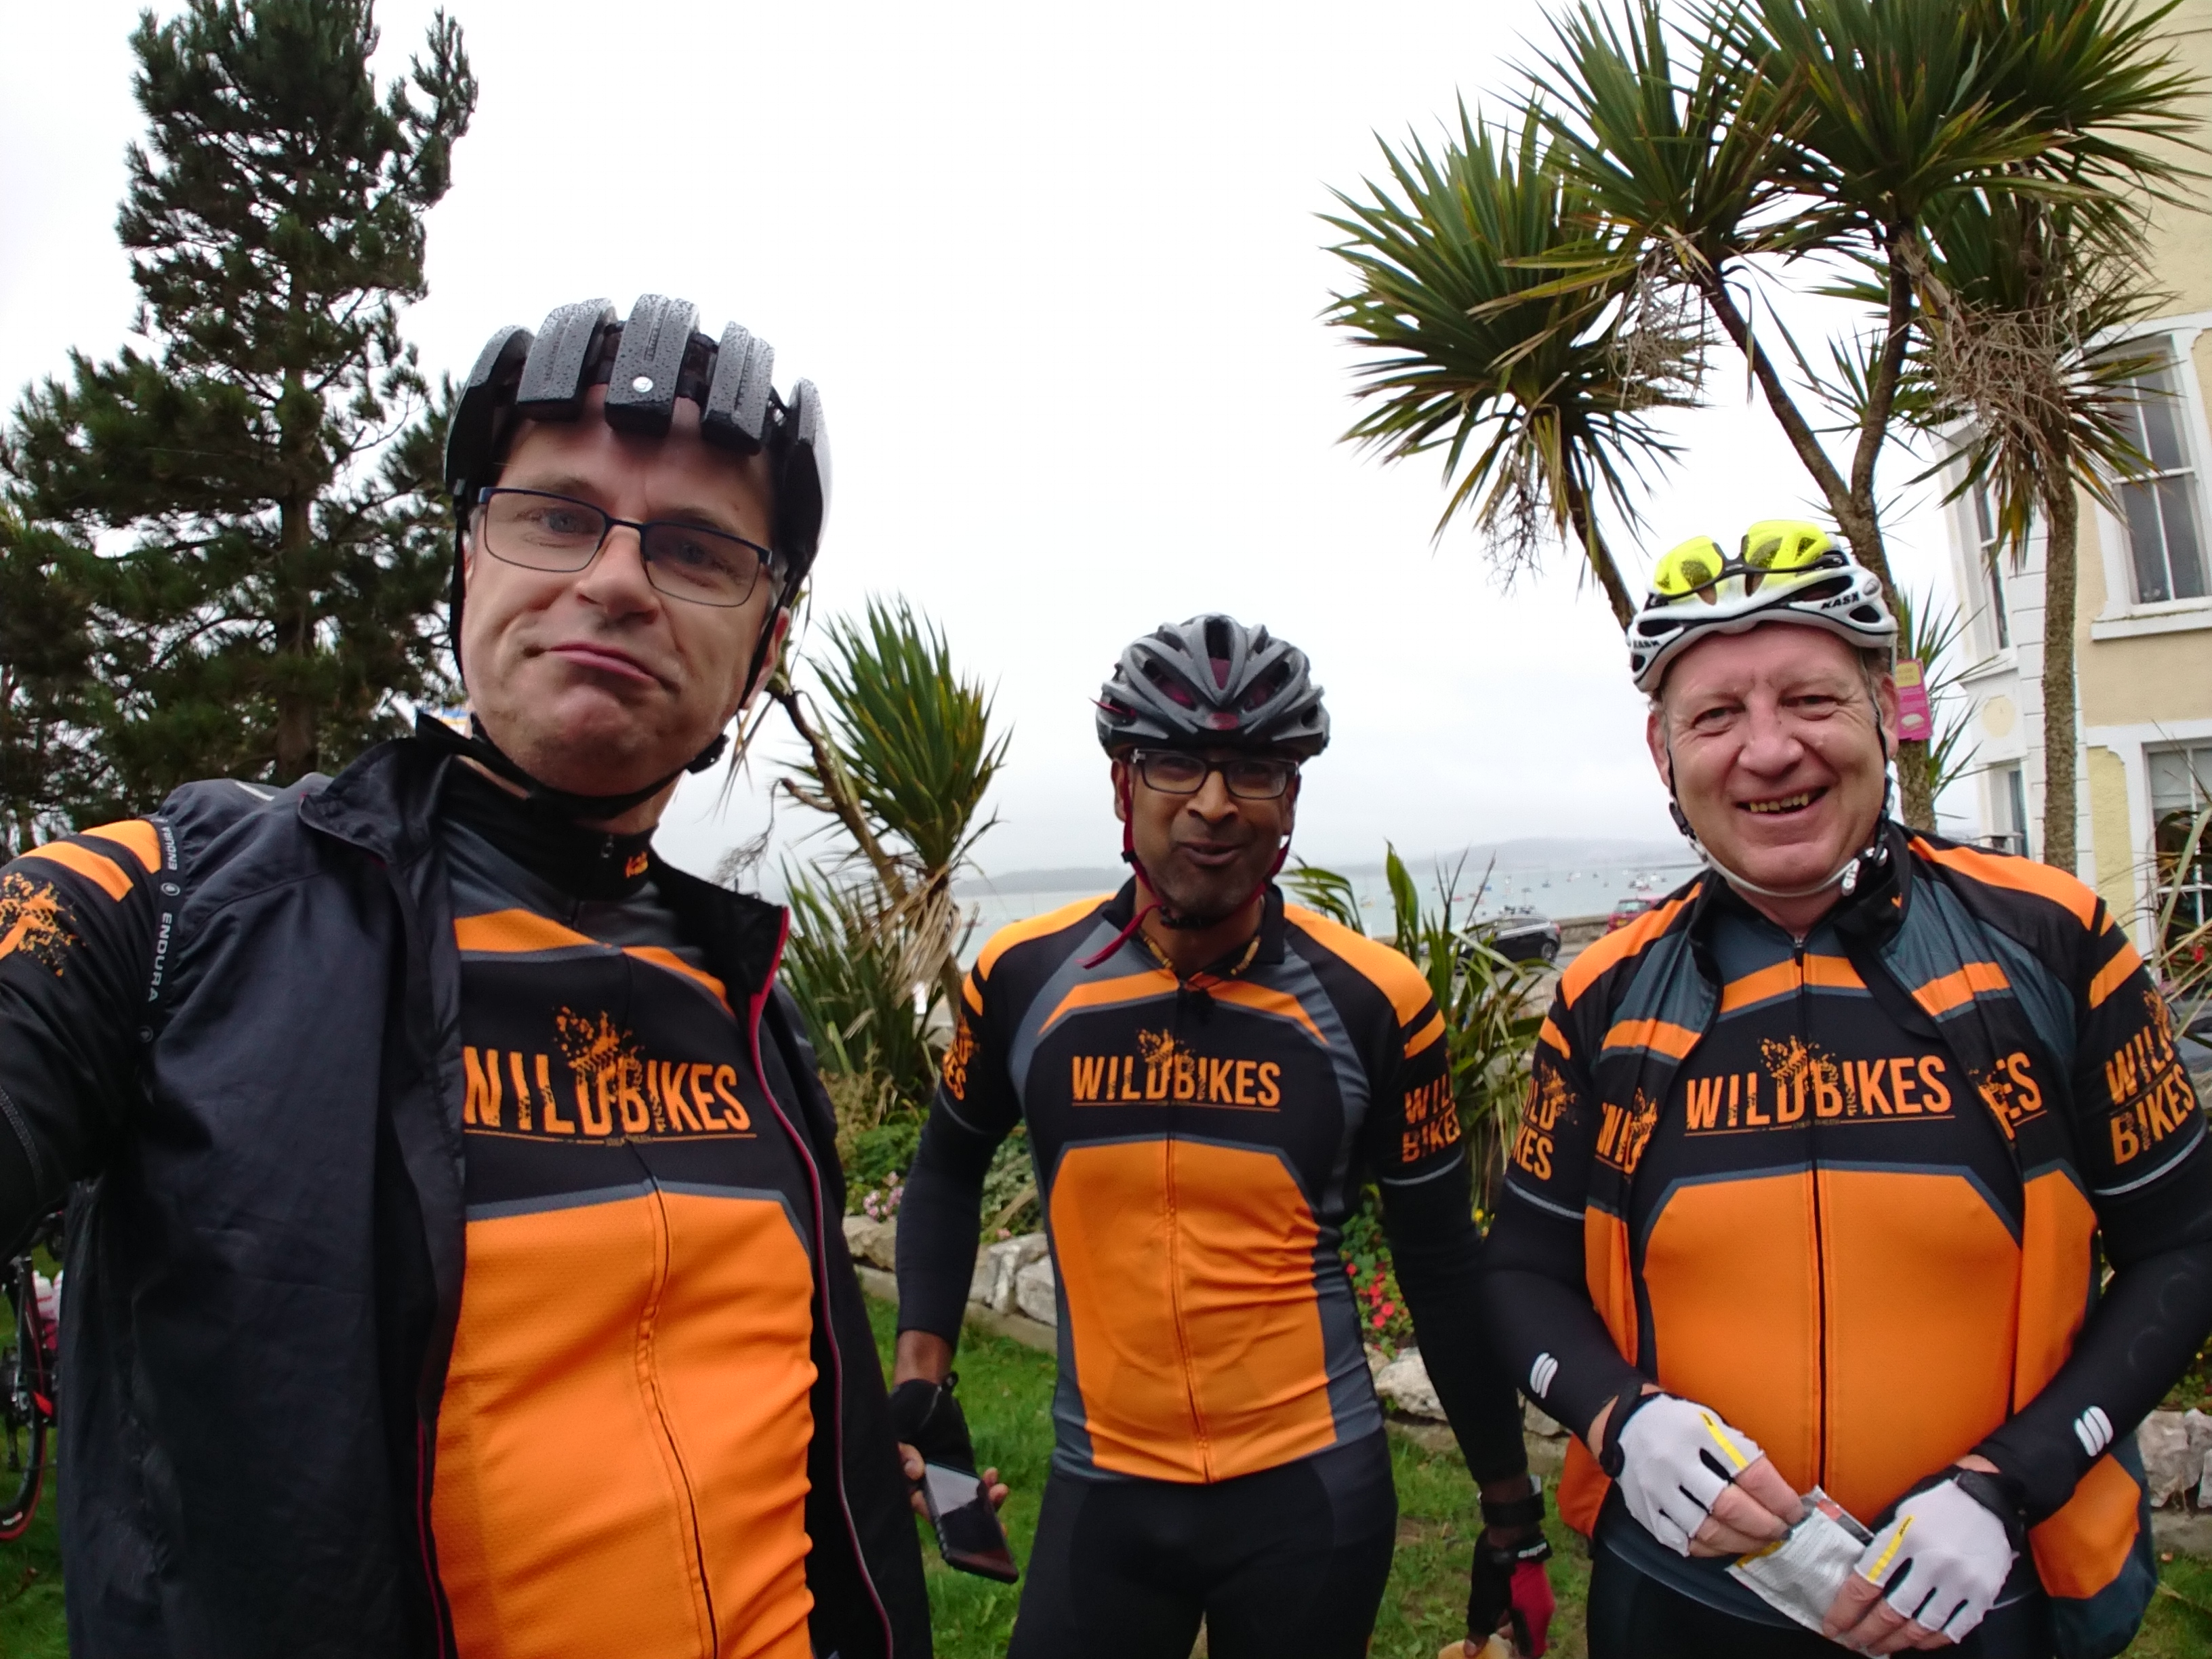 A brief sighting of all three Wild Bikers on the Tour de Mon sportive!